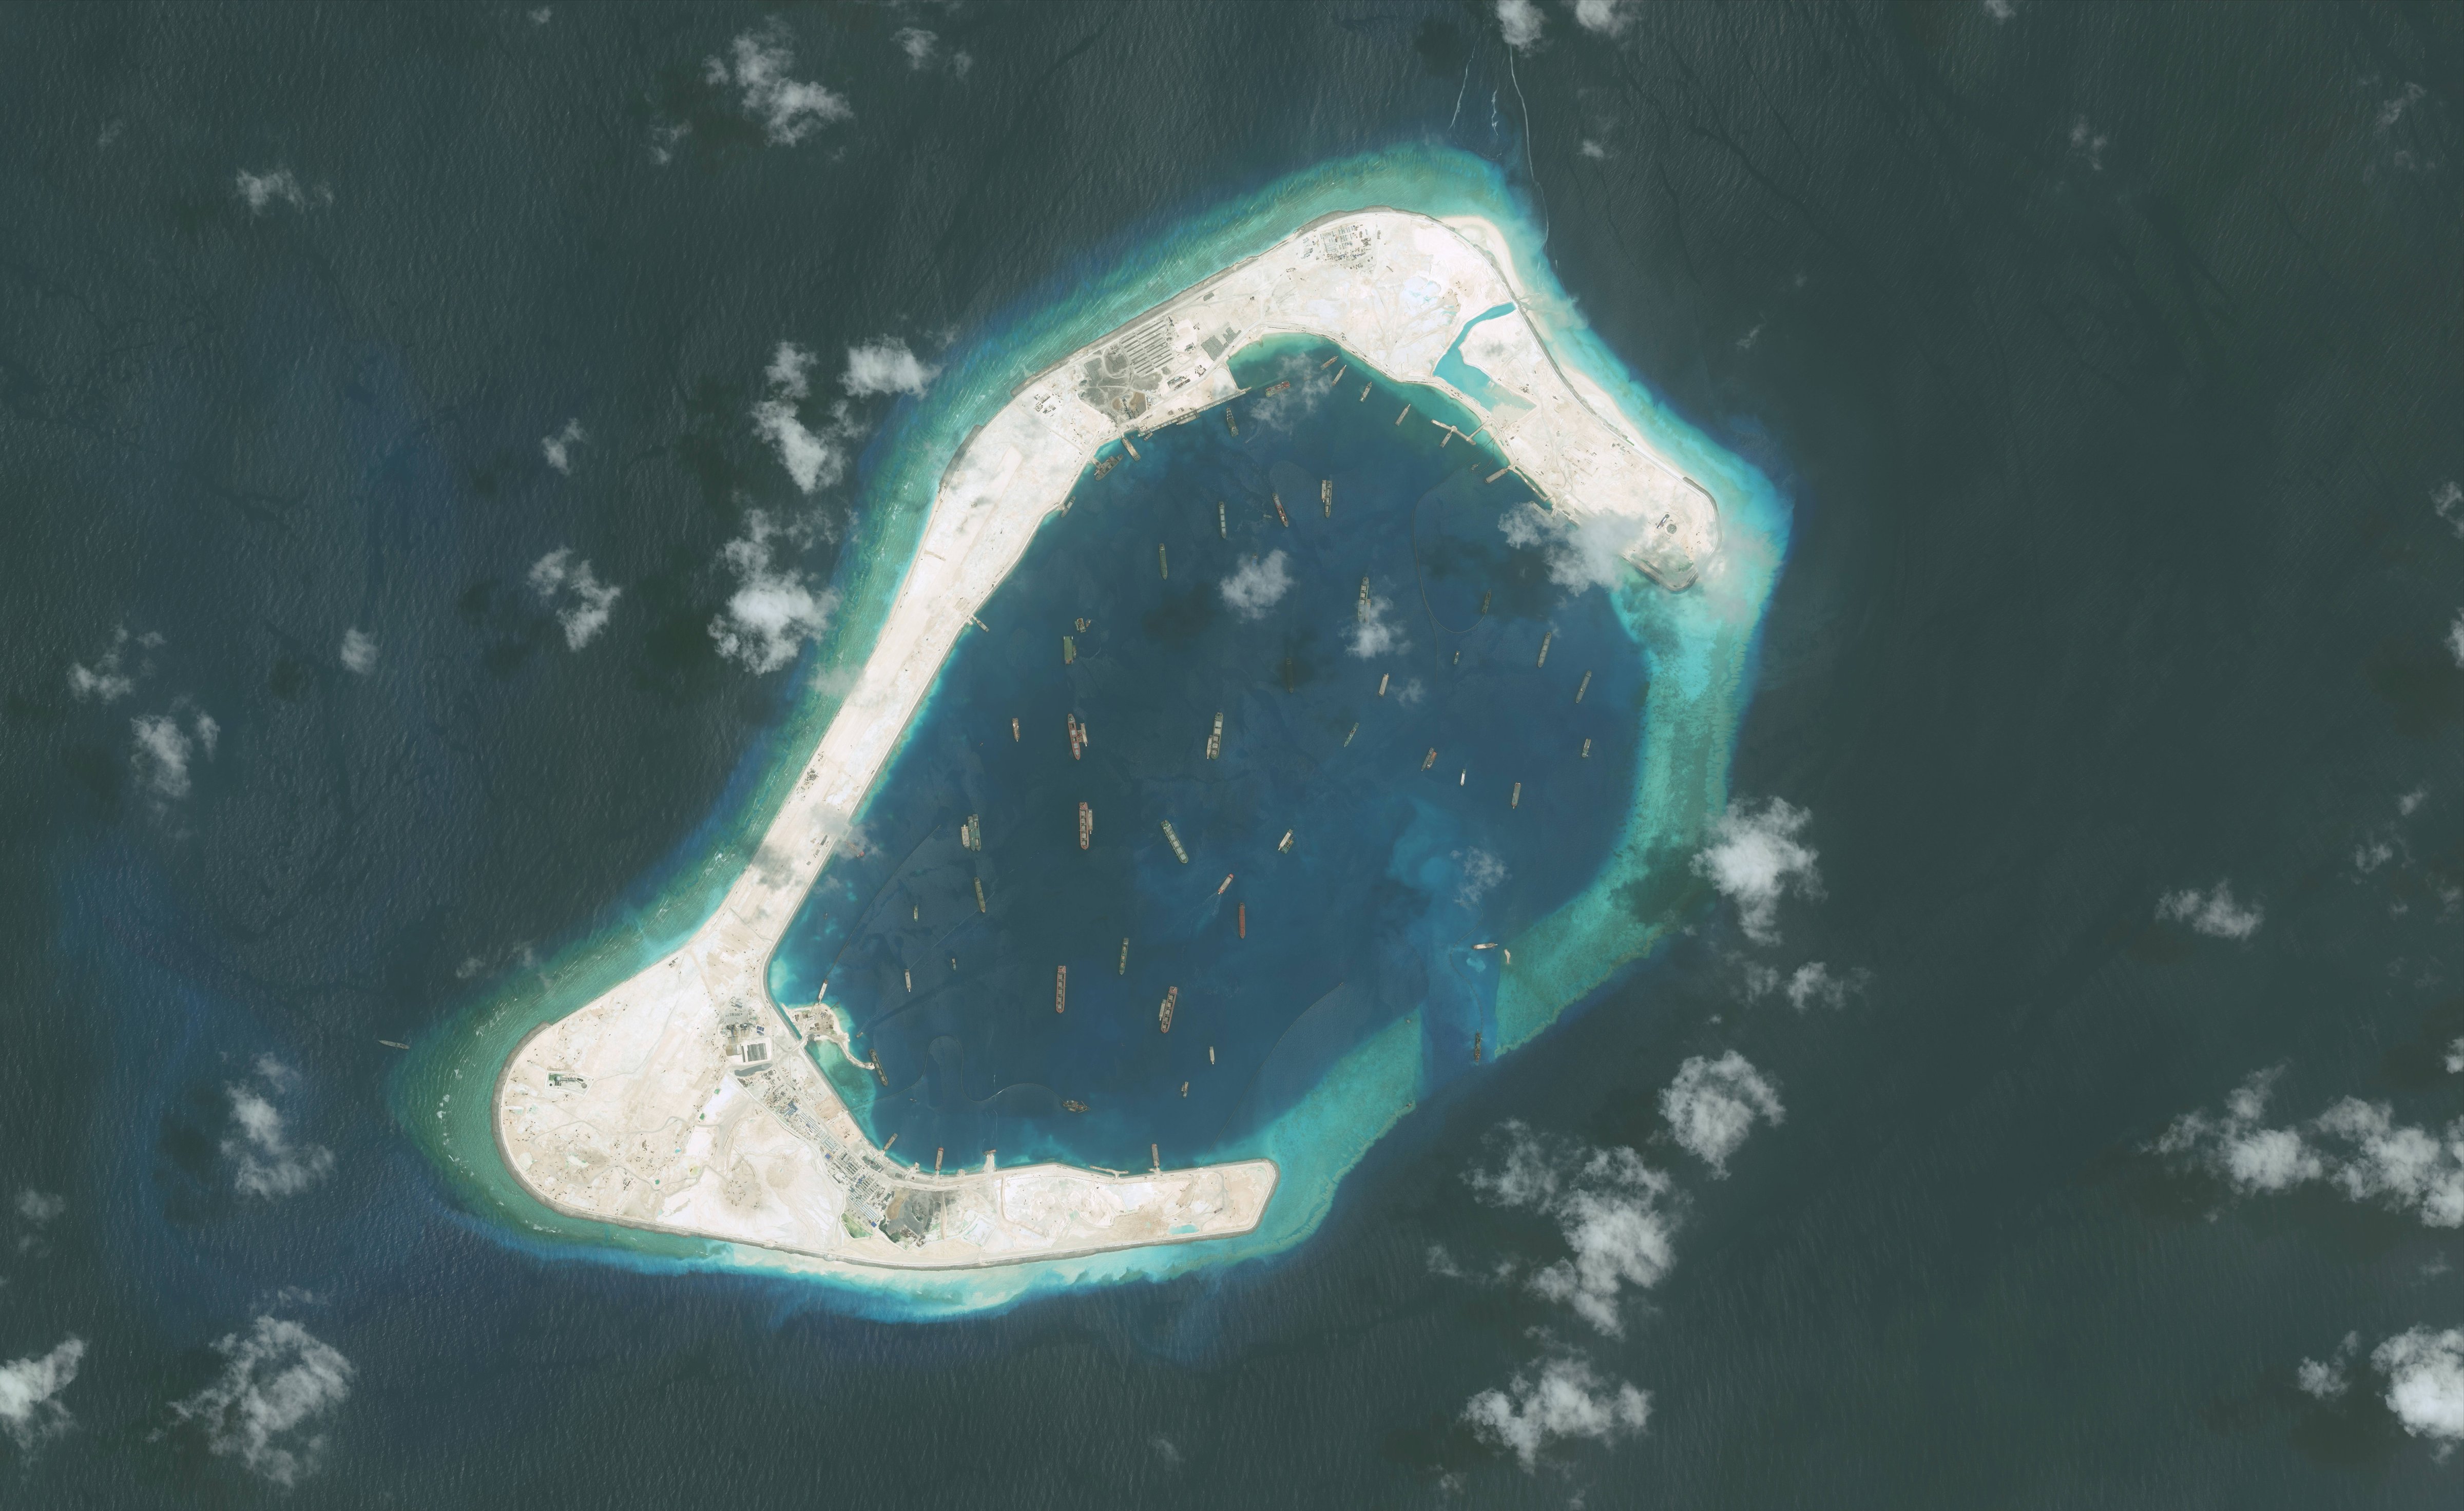 DigitalGlobe imagery of the Subi Reef in the South China Sea, a part of the Spratly Islands group, Sept. 1, 2015 (DigitalGlobe/ScapeWare3d—DigitalGlobe/Getty Images)